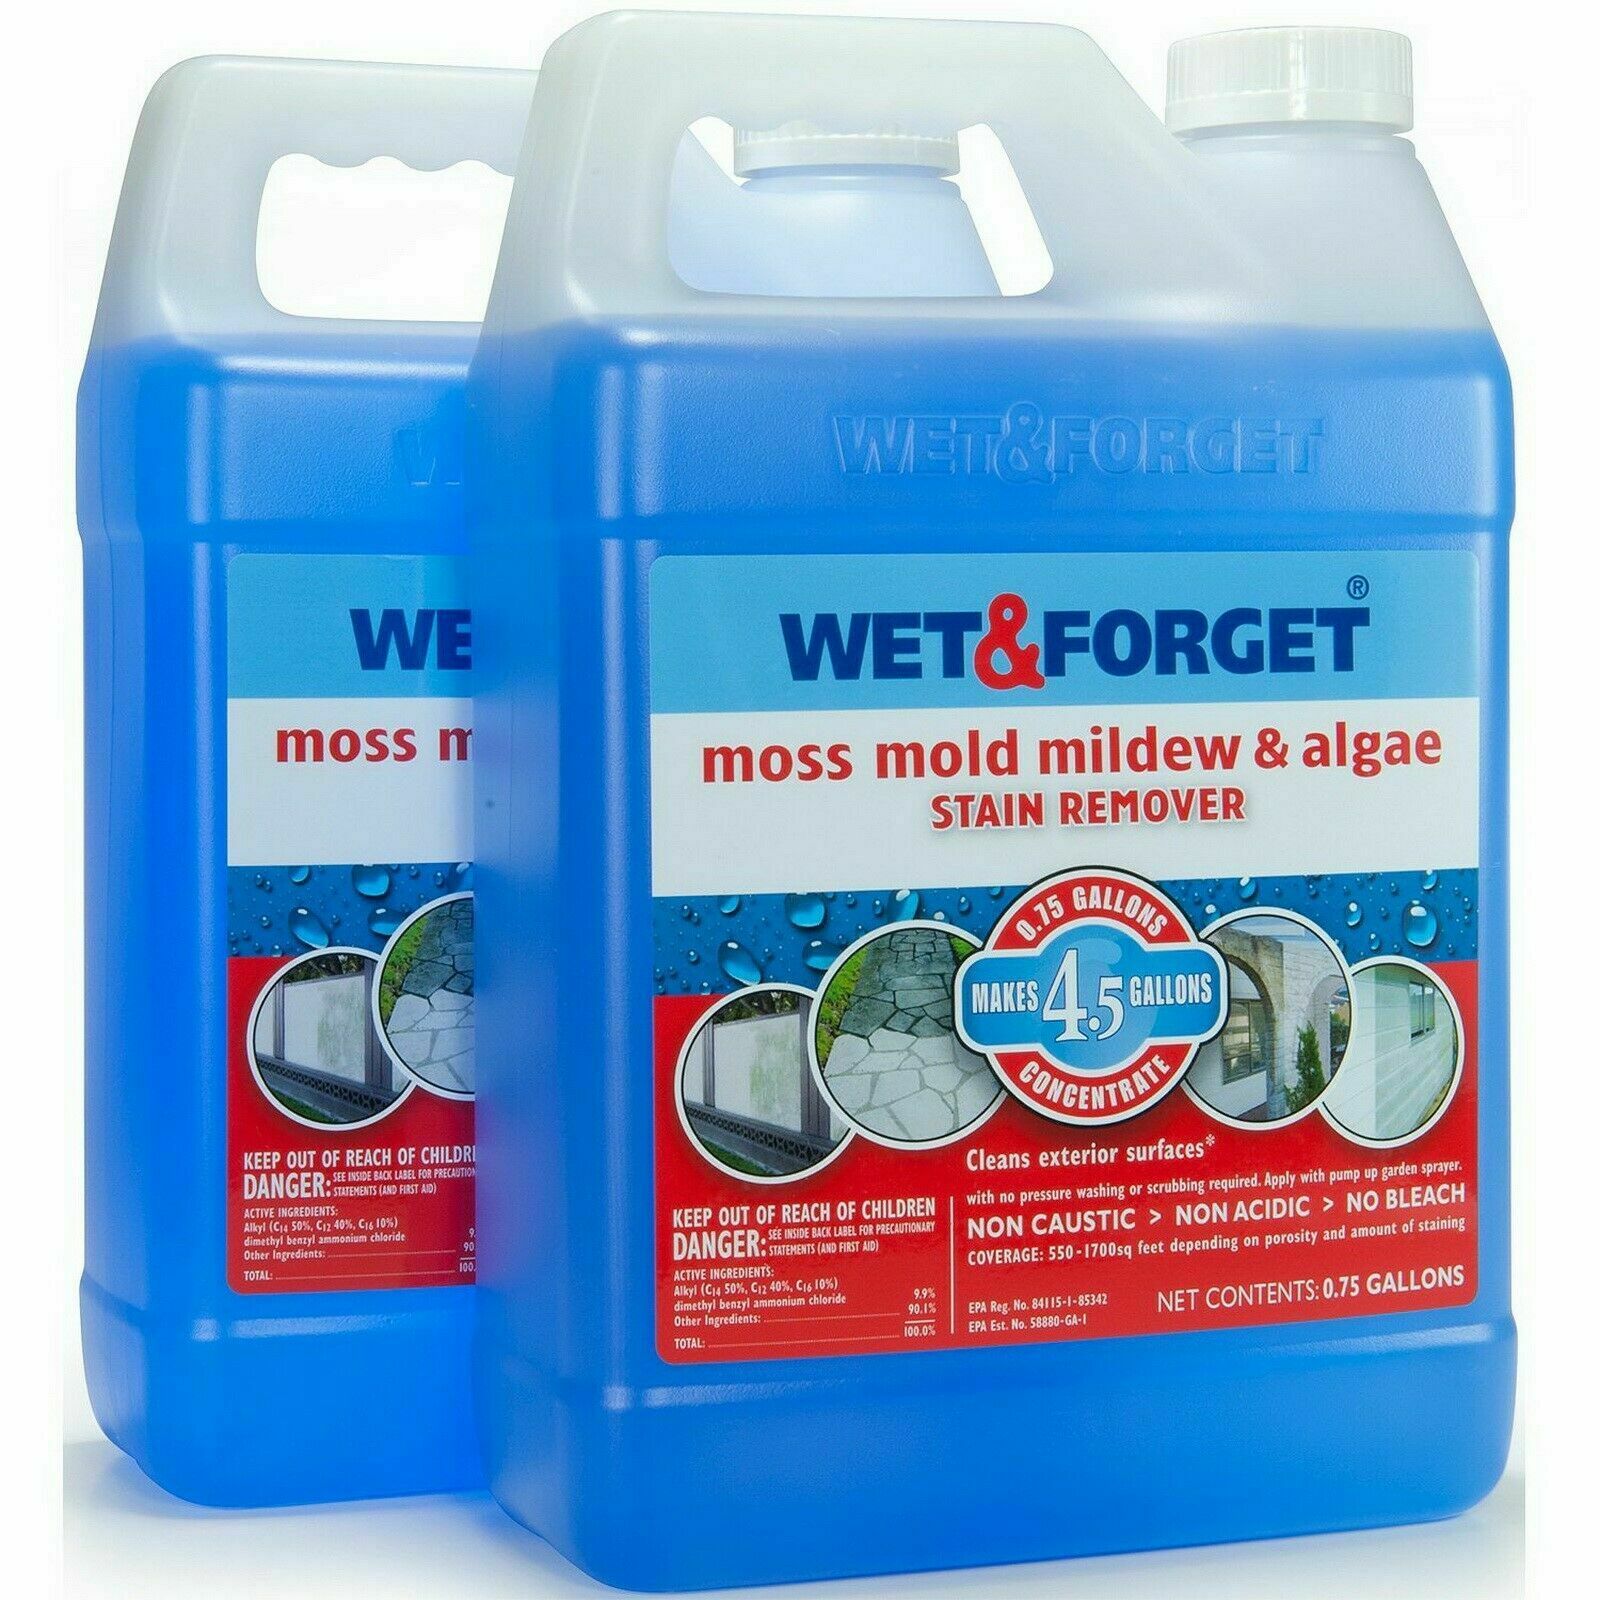 Wet & Forget Moss Mold And Mildew Algae Stain Remover .75 Gallon 2 Pack